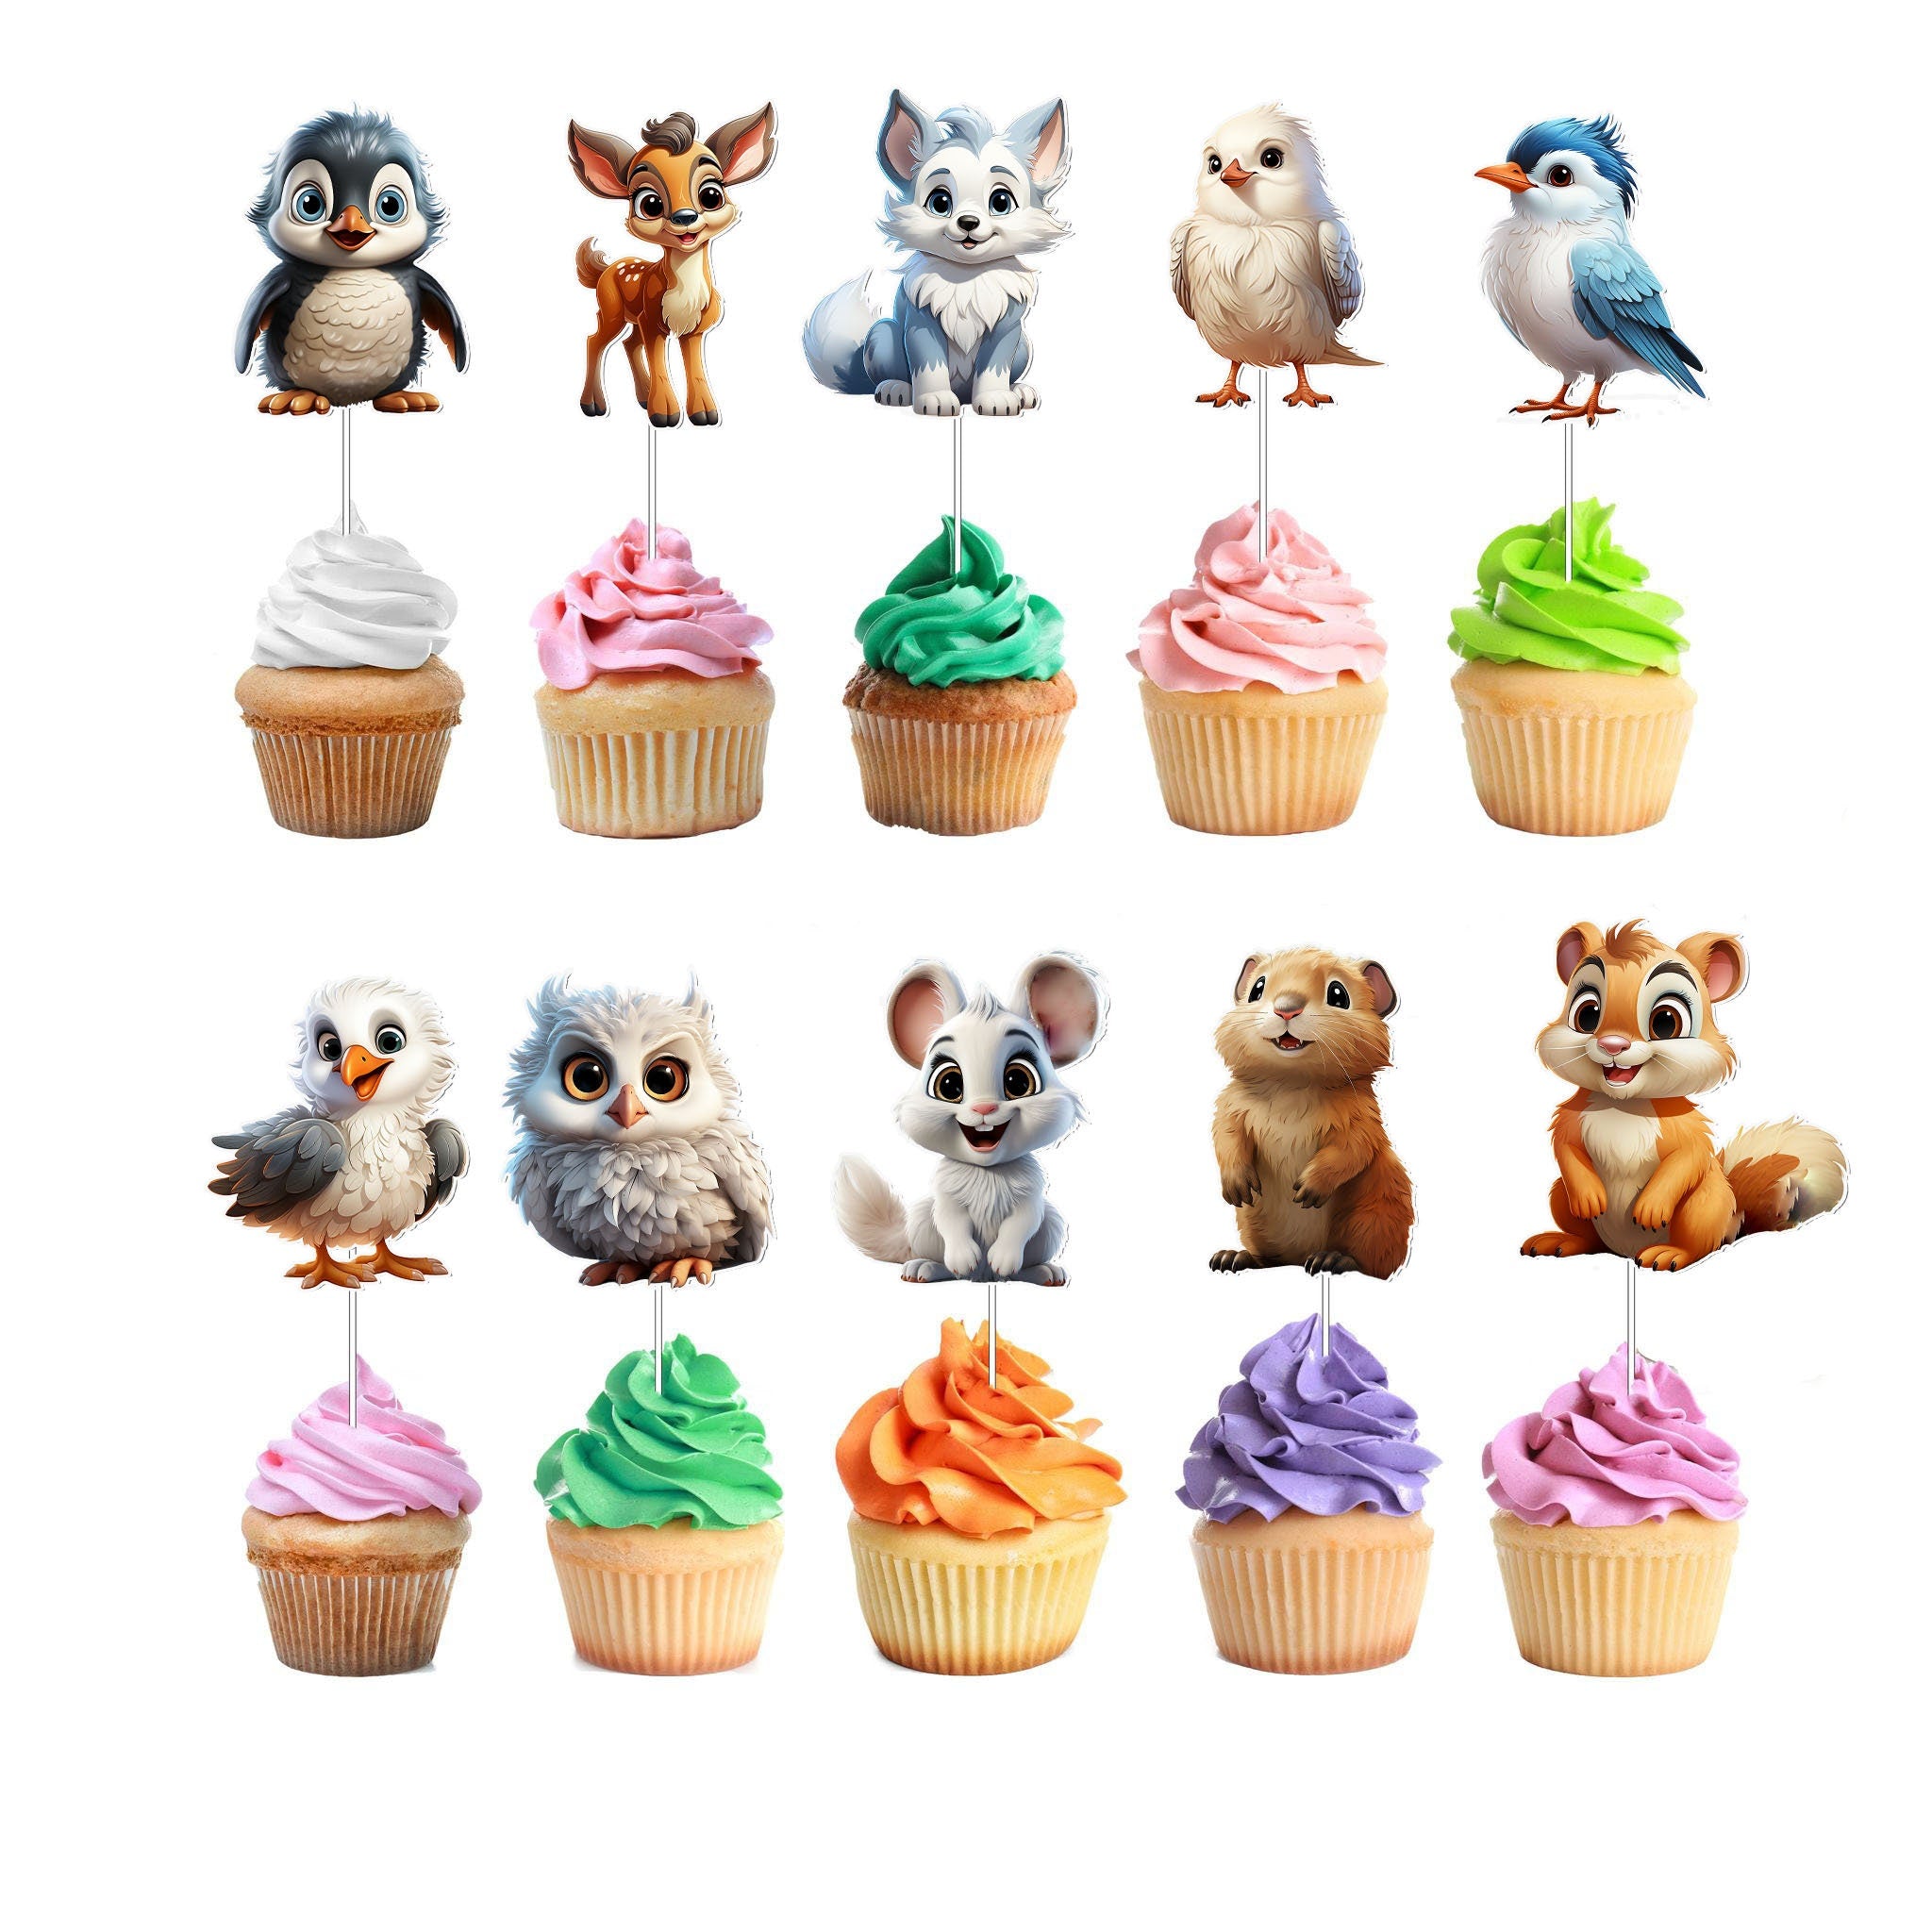 "Whimsical Woods" Forest Friends Cupcake Toppers - Add a Wild Twist to Your Treats!